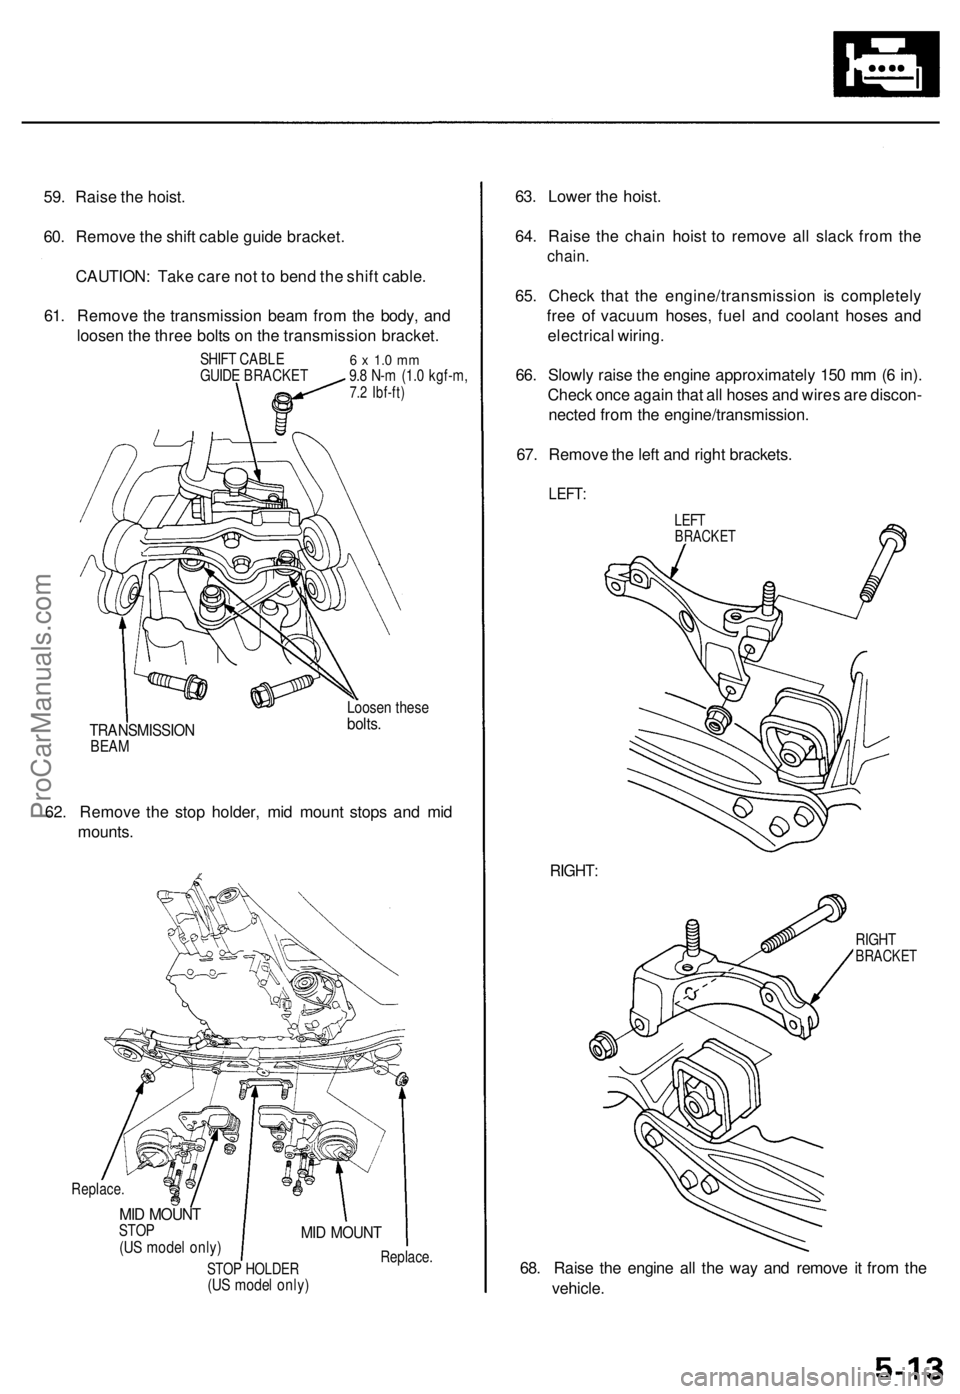 ACURA TL 1995  Service Repair Manual 
59. Raise the hoist.

60. Remove the shift cable guide bracket.

CAUTION: Take care not to bend the shift cable.

61. Remove the transmission beam from the body, and

loosen the three bolts on the tr